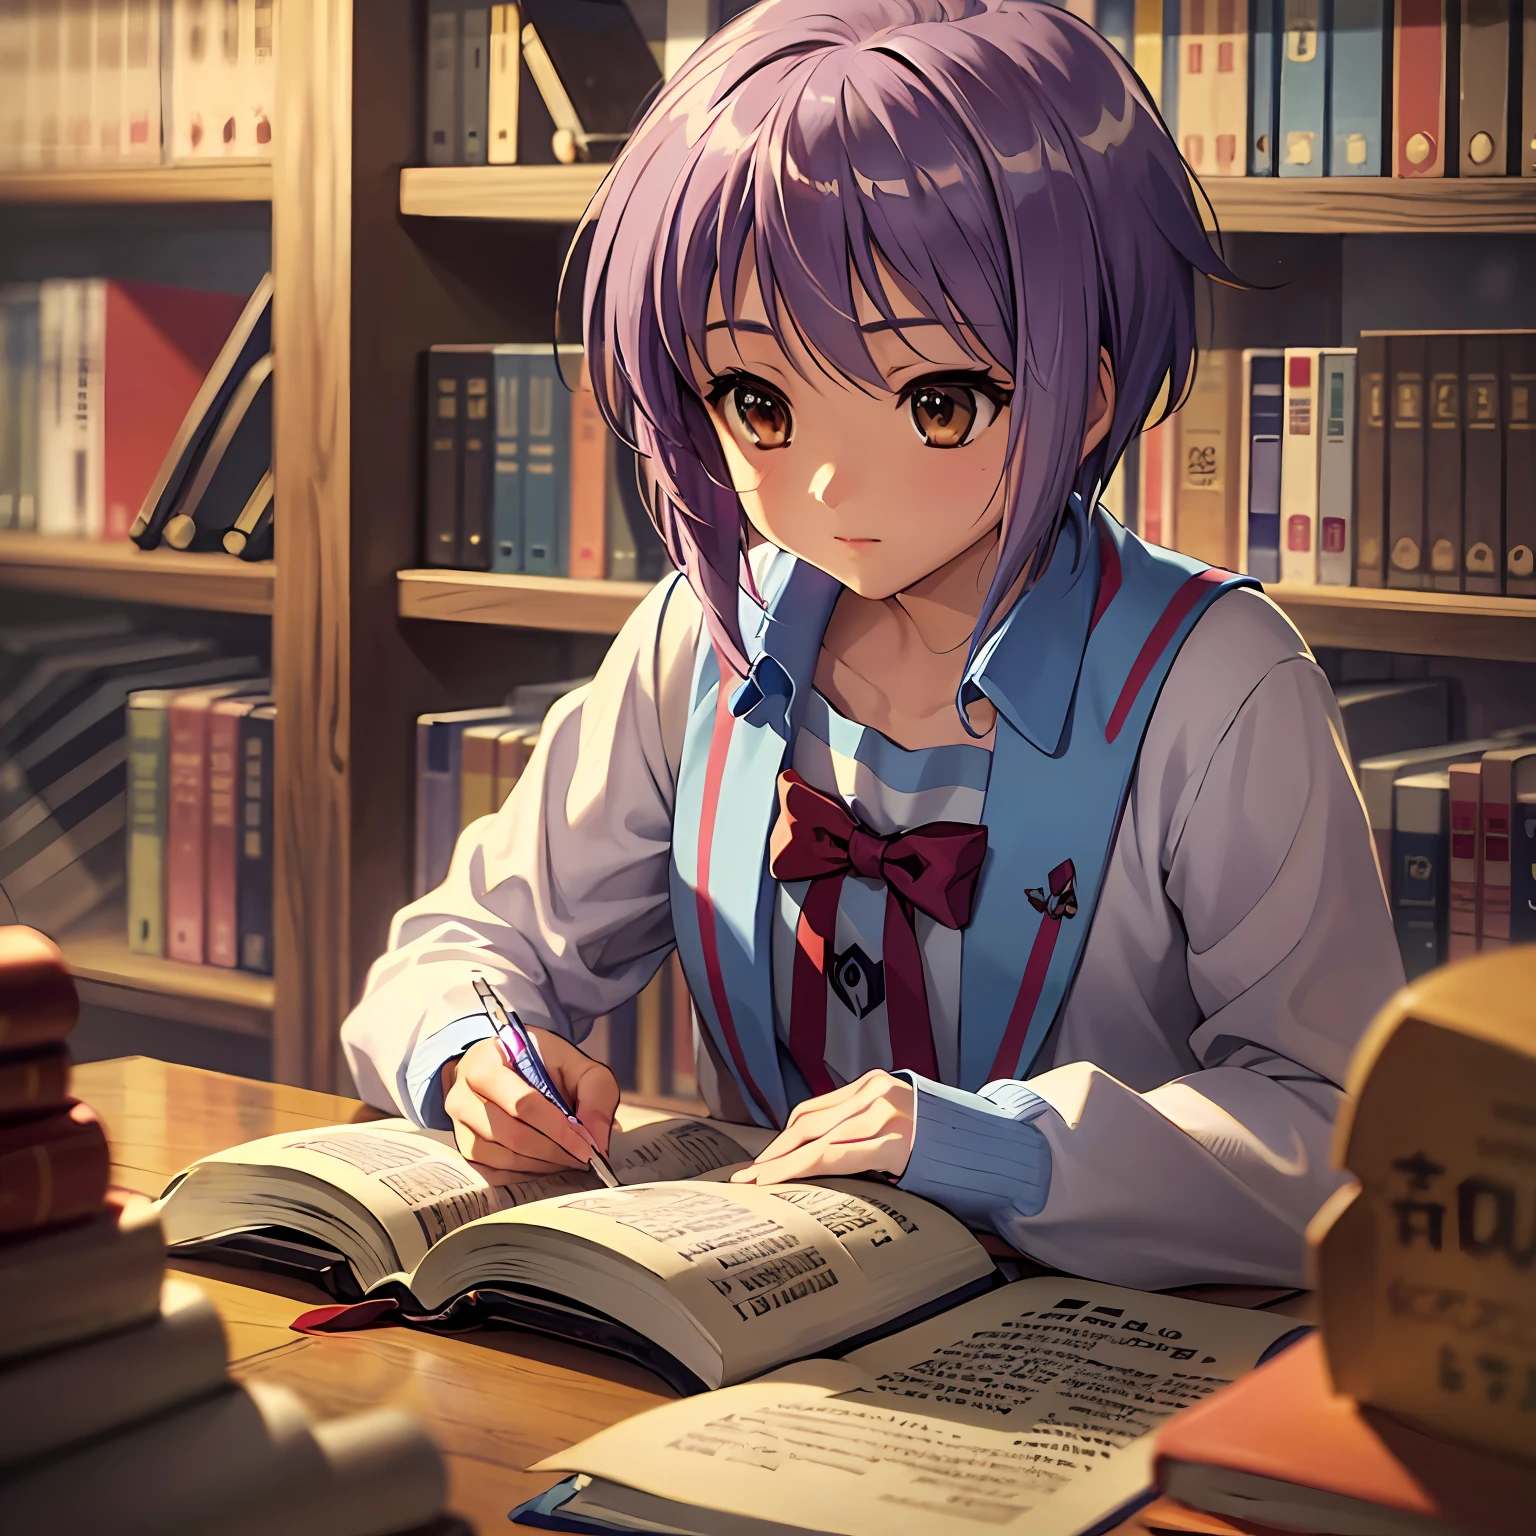 Yuki Nagato, the enigmatic character from "Suzumiya Haruhi no Yuutsu," seems to lead an ordinary, unassuming life on the surface. Her daily activities are veiled in mystery, often unnoticed by her peers. Yet, beneath her reserved exterior, lies a voracious bookworm with a hidden passion for literature.

Every morning, Yuki sets out for school with a quiet demeanor. Her peers see her as a reserved and unremarkable student, never suspecting the depth of knowledge she possesses. As she sits at her desk, her nose buried in a book, her classmates assume she's merely completing her assignments. Little do they know that Yuki's books hold secrets to worlds far beyond the ordinary.

During lunch breaks, Yuki finds solace in the school library, surrounded by the comforting scent of aged pages. She immerses herself in books of every genre, from classic literature to obscure scientific journals. Reading is her gateway to endless possibilities, where imagination knows no bounds.

As the afternoon classes drone on, Yuki's mind often drifts to the worlds she has explored within the pages of her books. Her eyes may be focused on the chalkboard, but her thoughts are always a universe away. In the realm of her mind, she conjures up adventures, unraveling mysteries, and delving into the depths of human emotions.

After school, Yuki slips away to a quiet corner of the library, away from the bustling crowds. Here, she finds comfort and solace among the rows of books that line the shelves. In the world of literature, she finds companionship and understanding, a refuge from the complexities of reality.

Once the evening descends, Yuki returns to her home, where her room is adorned with shelves overflowing with books. This space is her sanctuary, where she can delve into stories until the late hours of the night. The soft glow of a lamp casts a warm aura, and she loses herself in the adventures of characters she's come to know as friends.